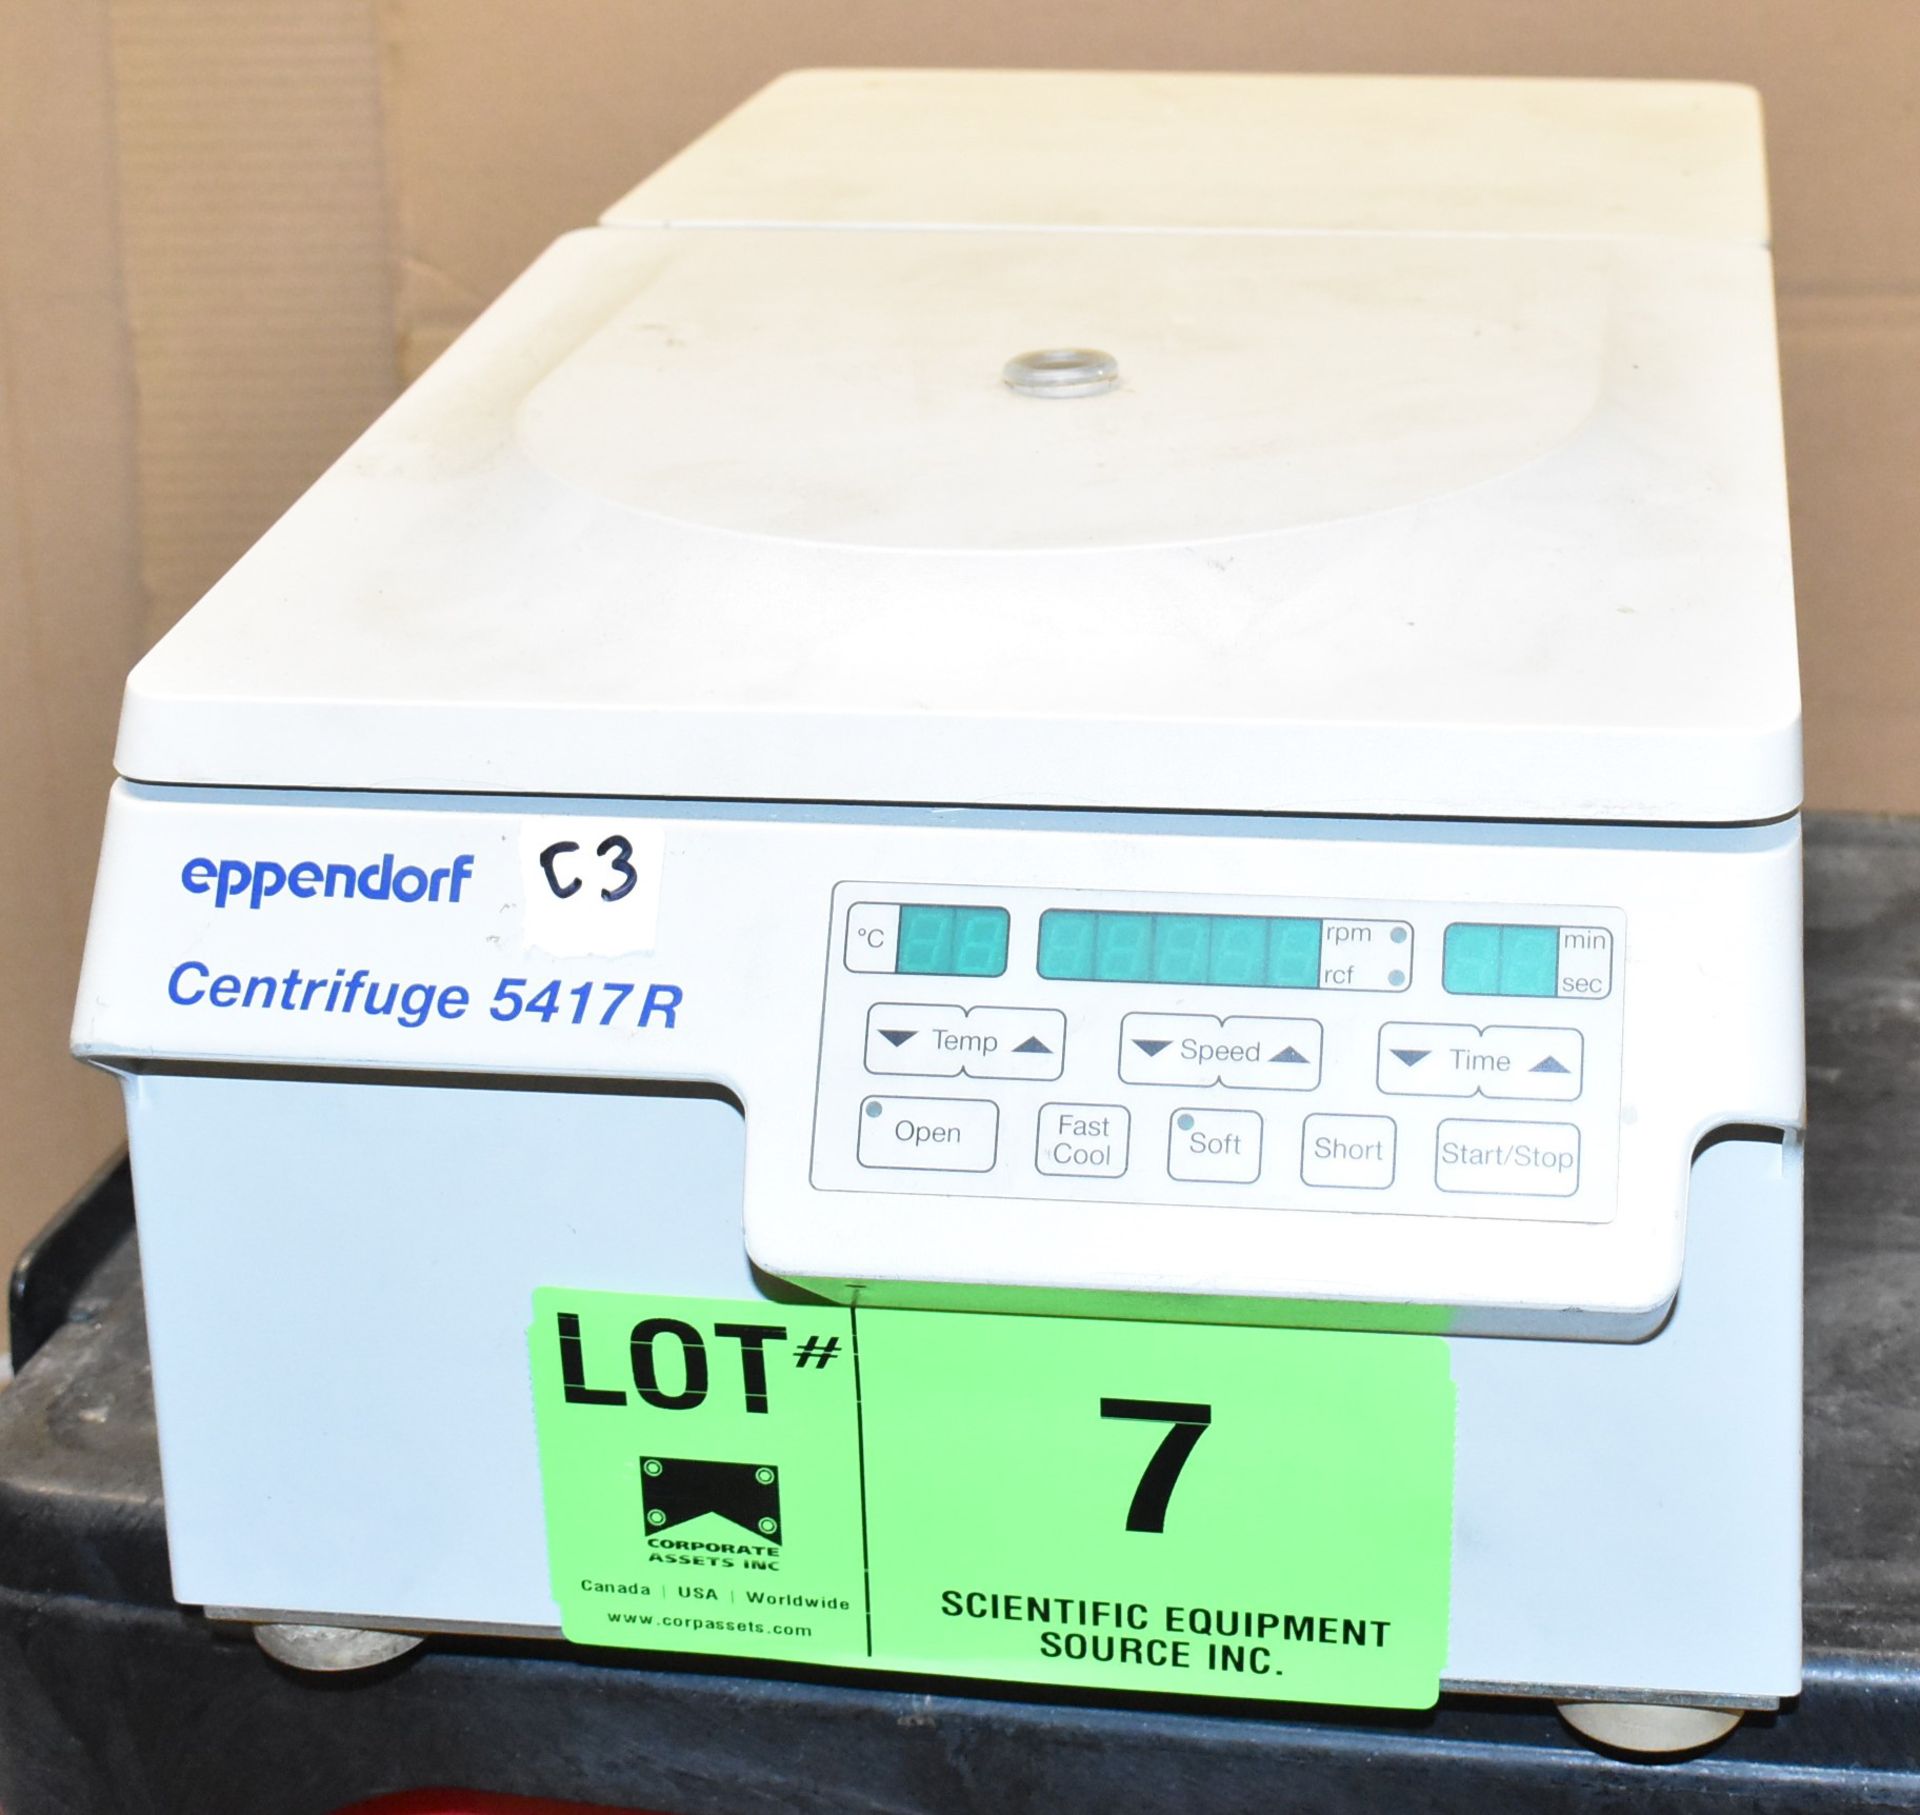 EPPENDORF 5417R BENCHTOP ROTARY MICRO-CENTRIFUGE WITH SPEEDS TO 14,000 RPM, 30X2.0 ML MAX. CAPACITY,